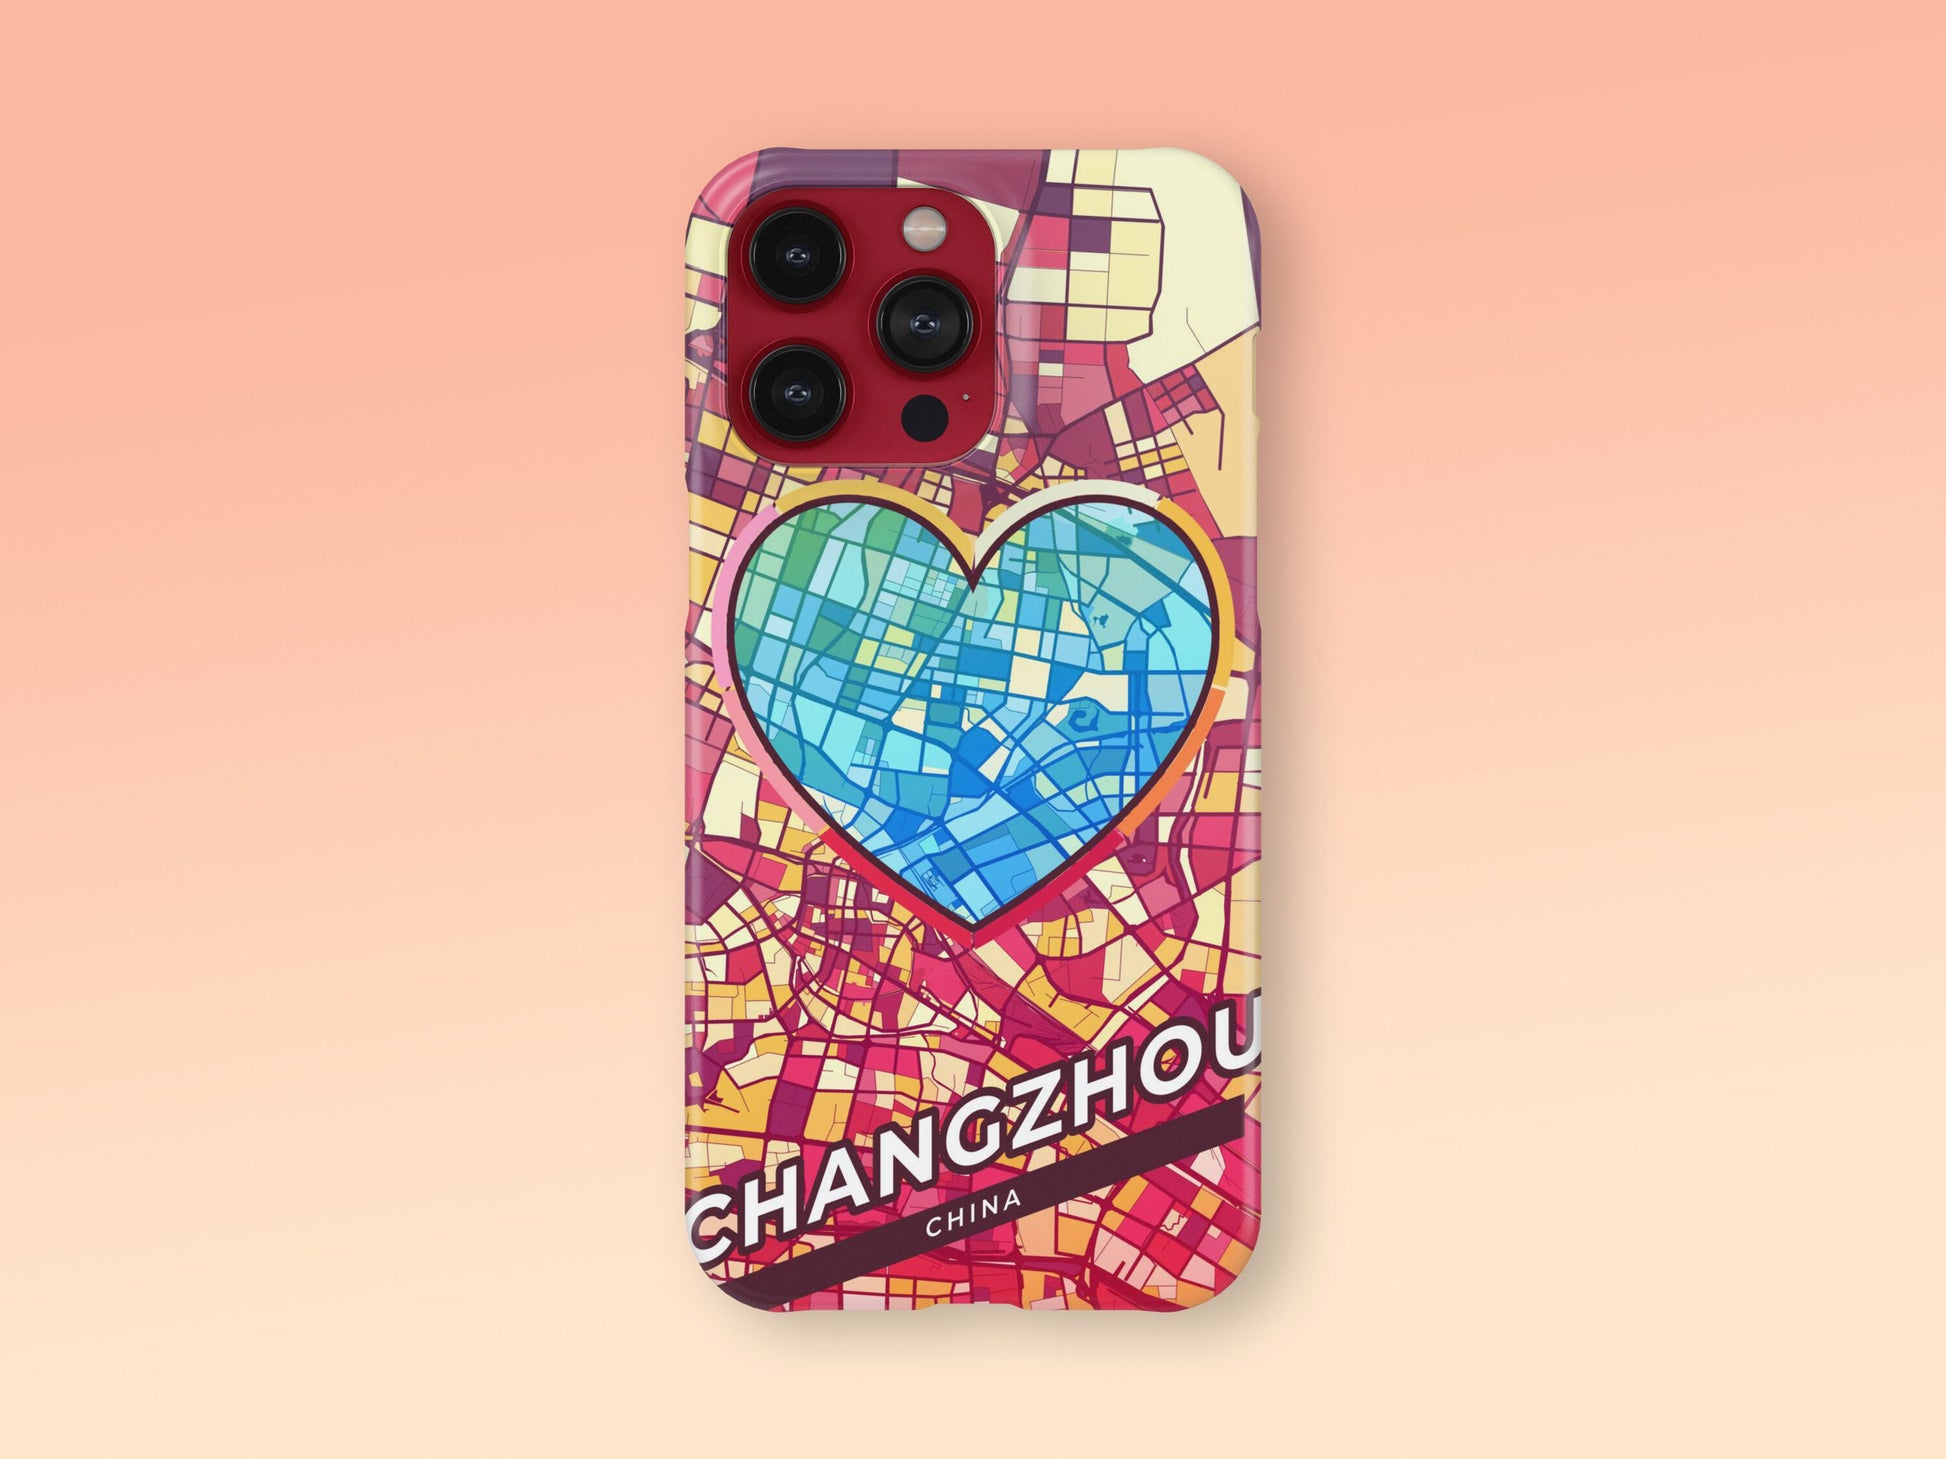 Changzhou China slim phone case with colorful icon. Birthday, wedding or housewarming gift. Couple match cases. 2